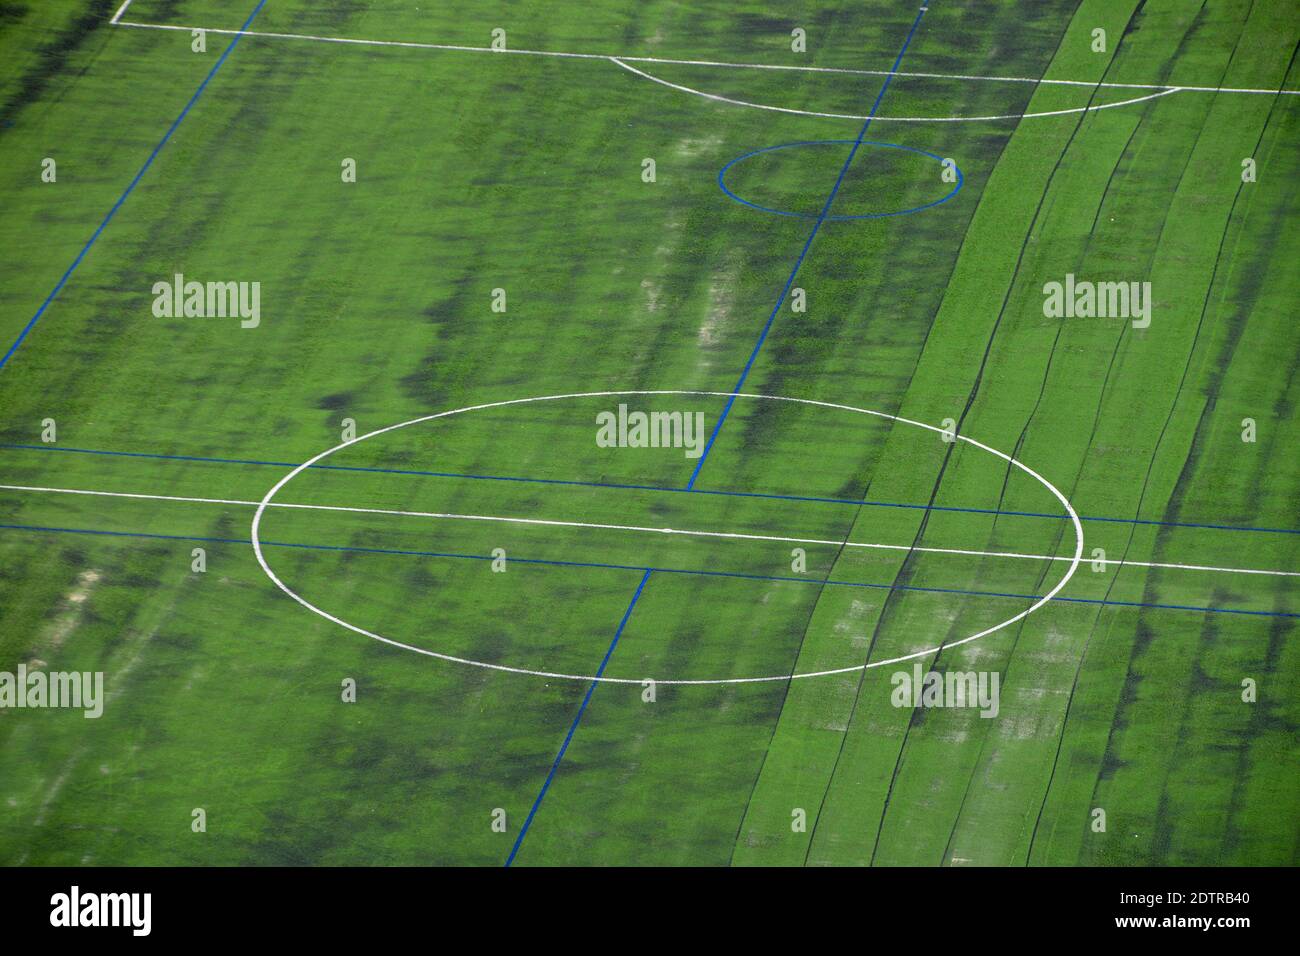 High Angle View Of Empty Soccer Field Stock Photo